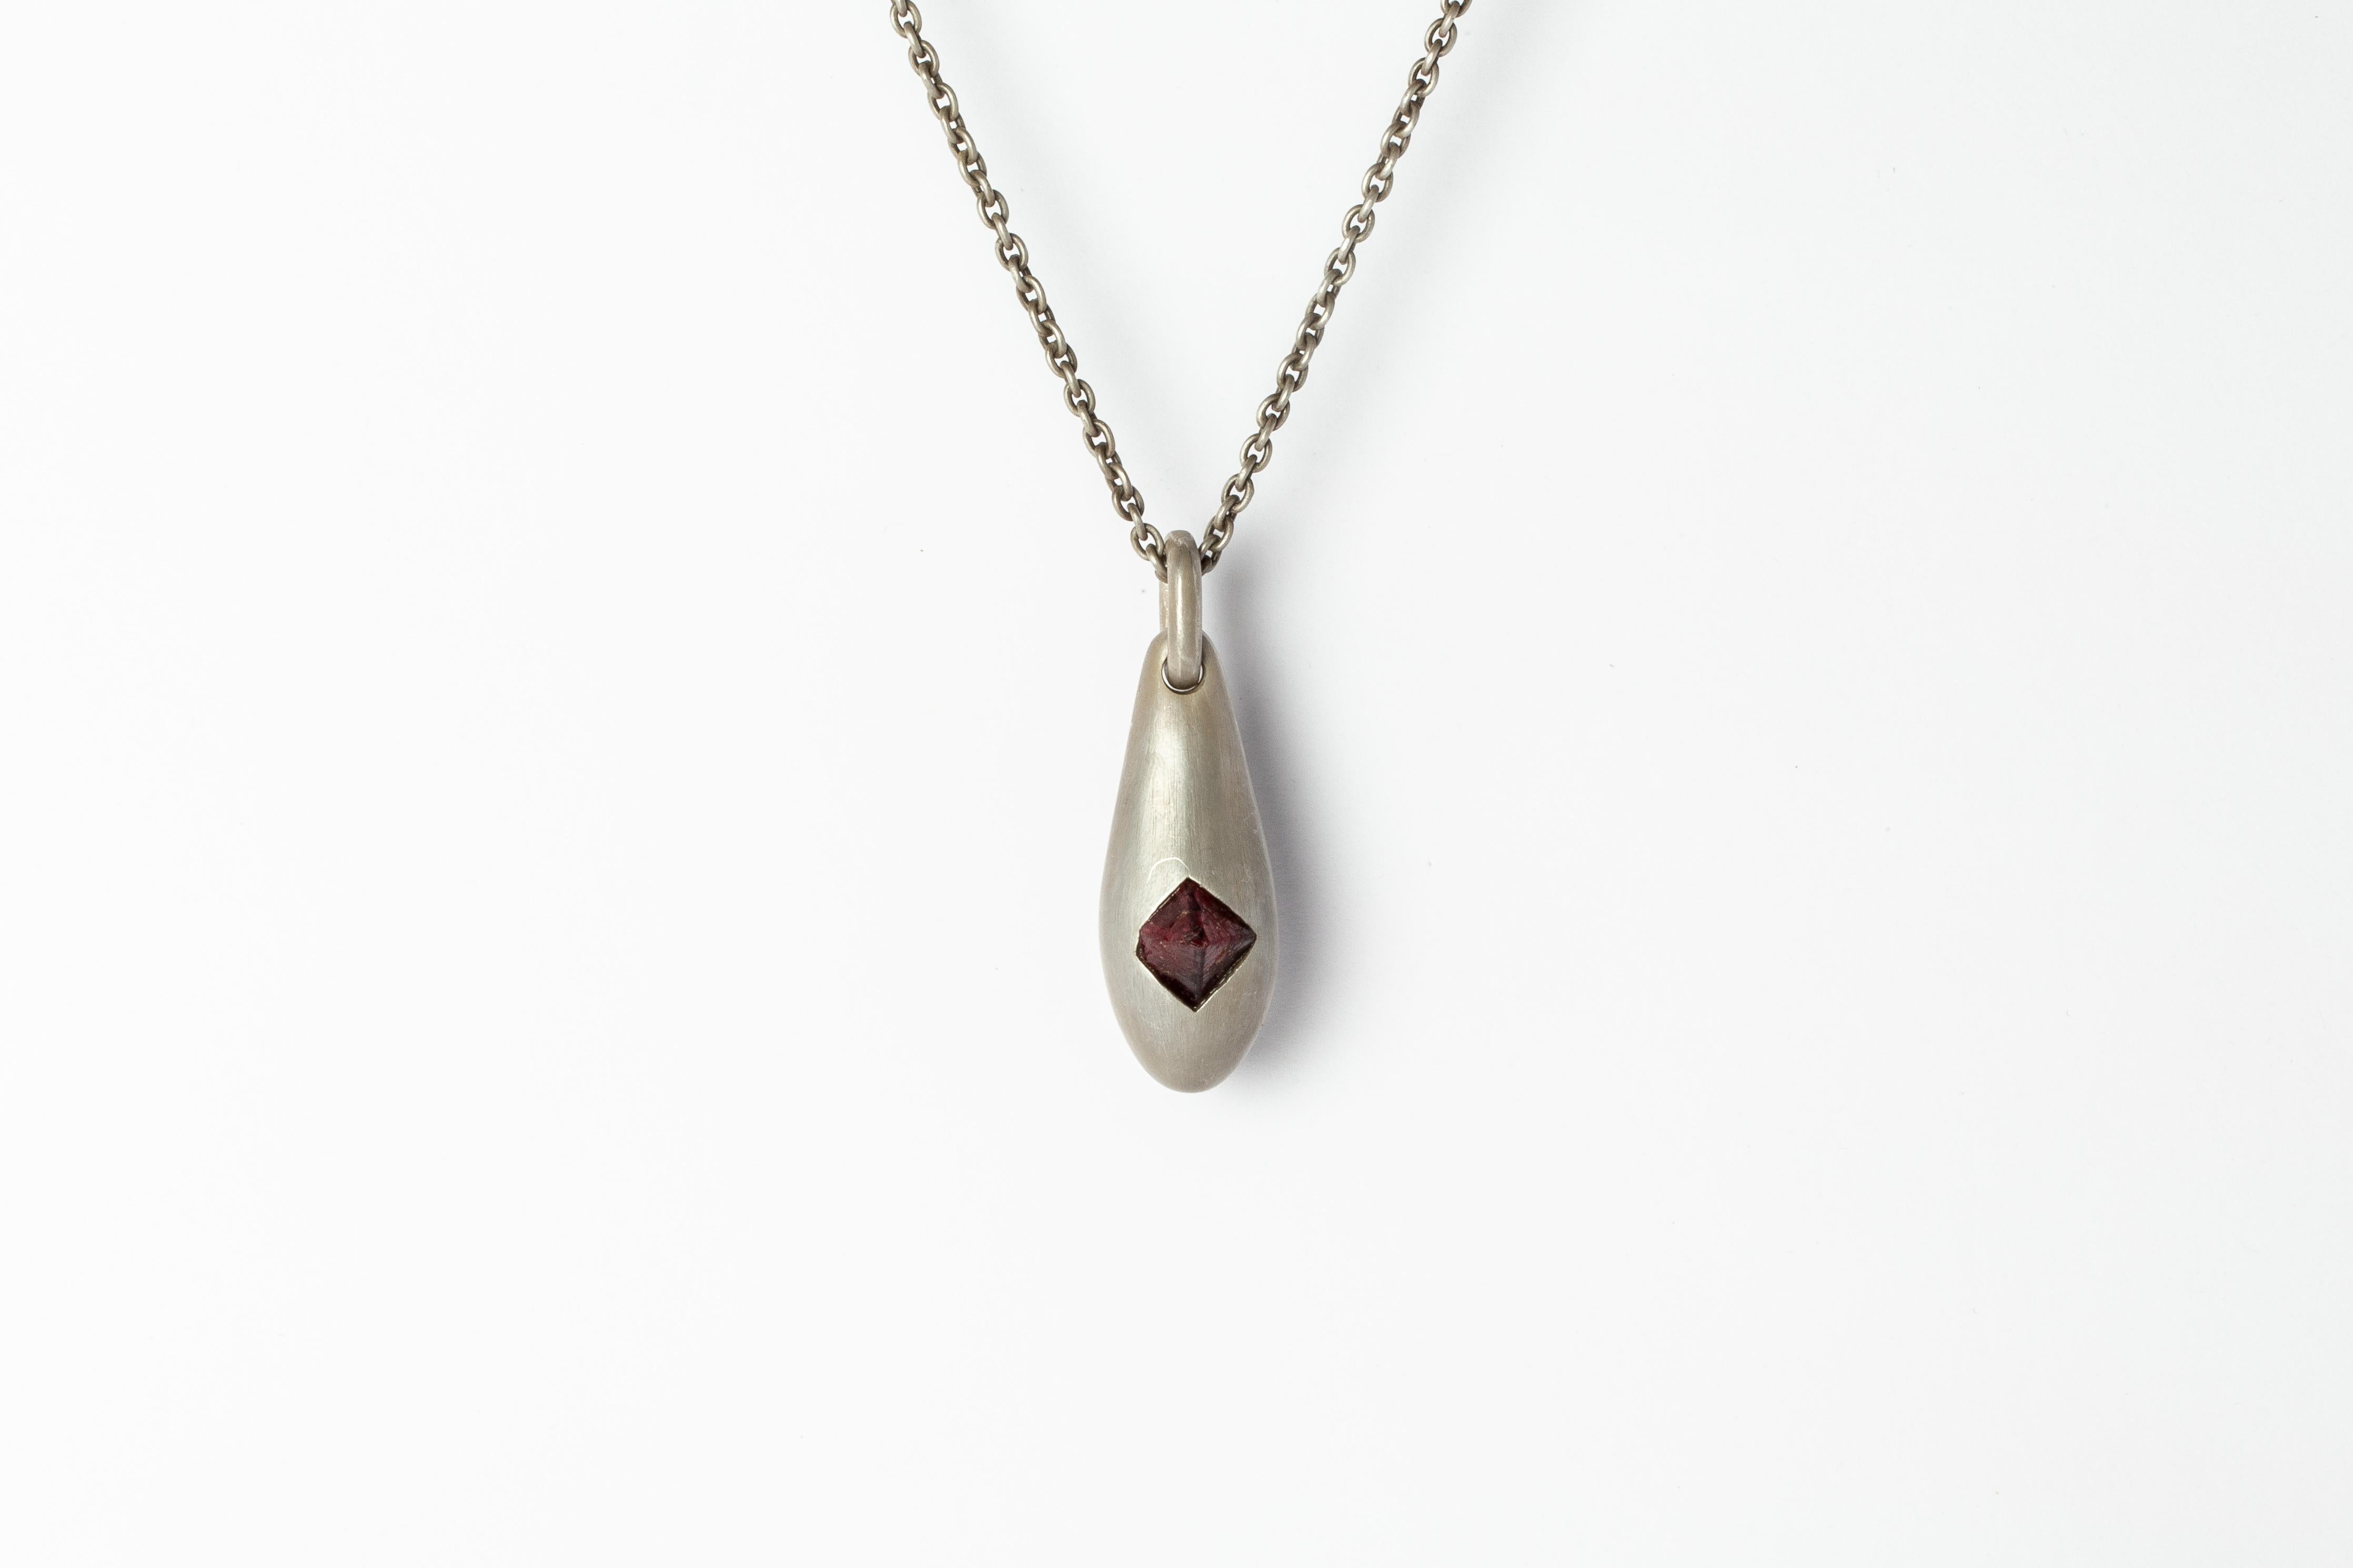 Rough Cut Chrysalis Necklace (Cremaster Emergence, Red Spinel, DA+SPL) For Sale